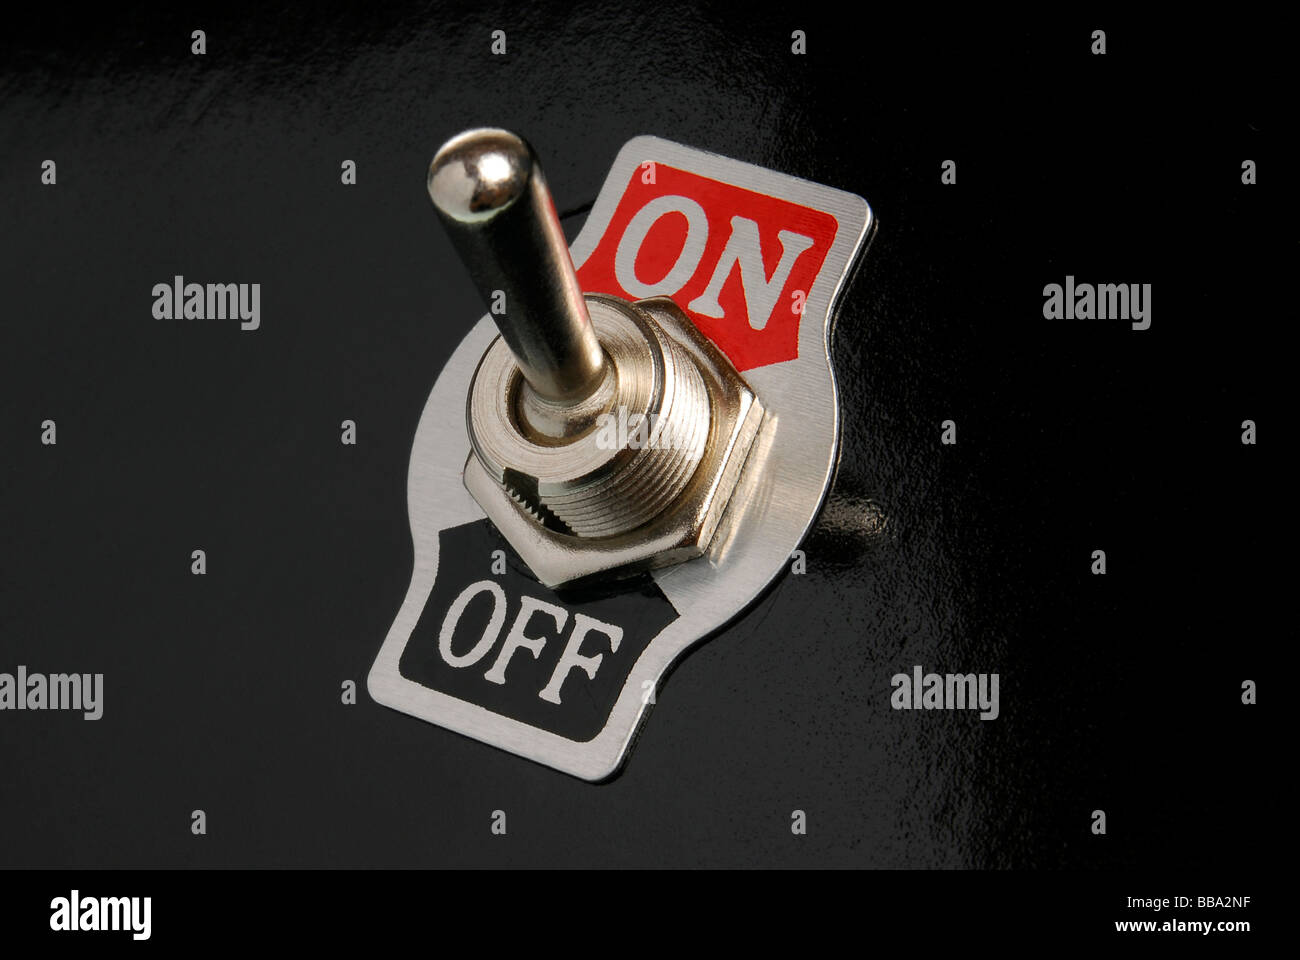 On/off switch Stock Photo